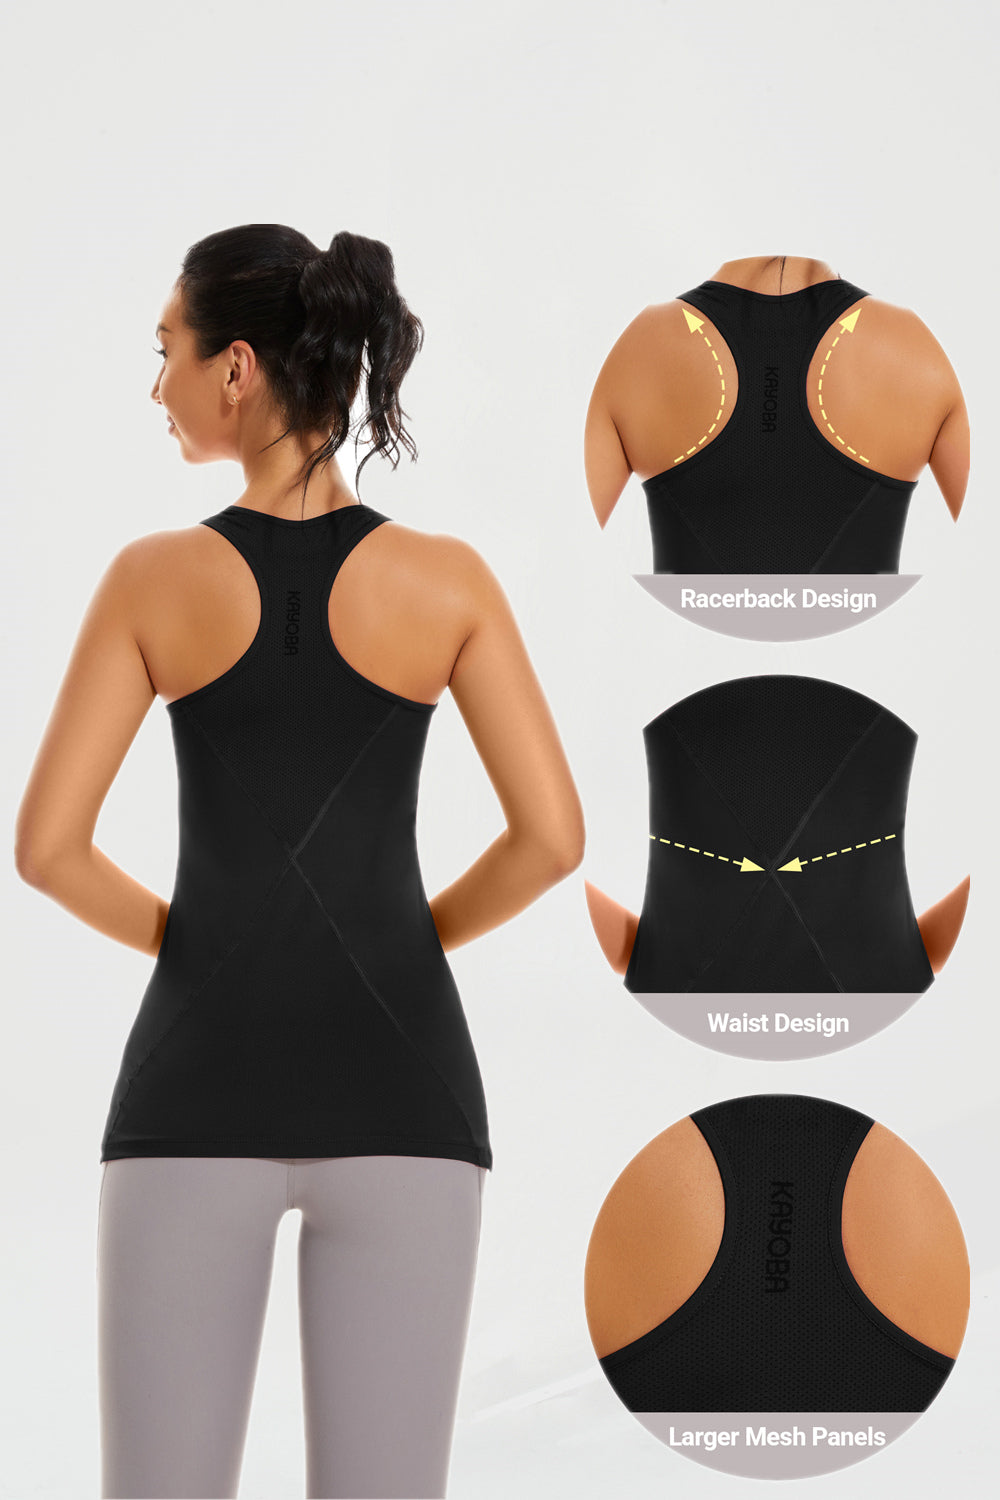 2 Pack Workout Tank Tops for Women Racerback Tanks Athletic shirts Black L  